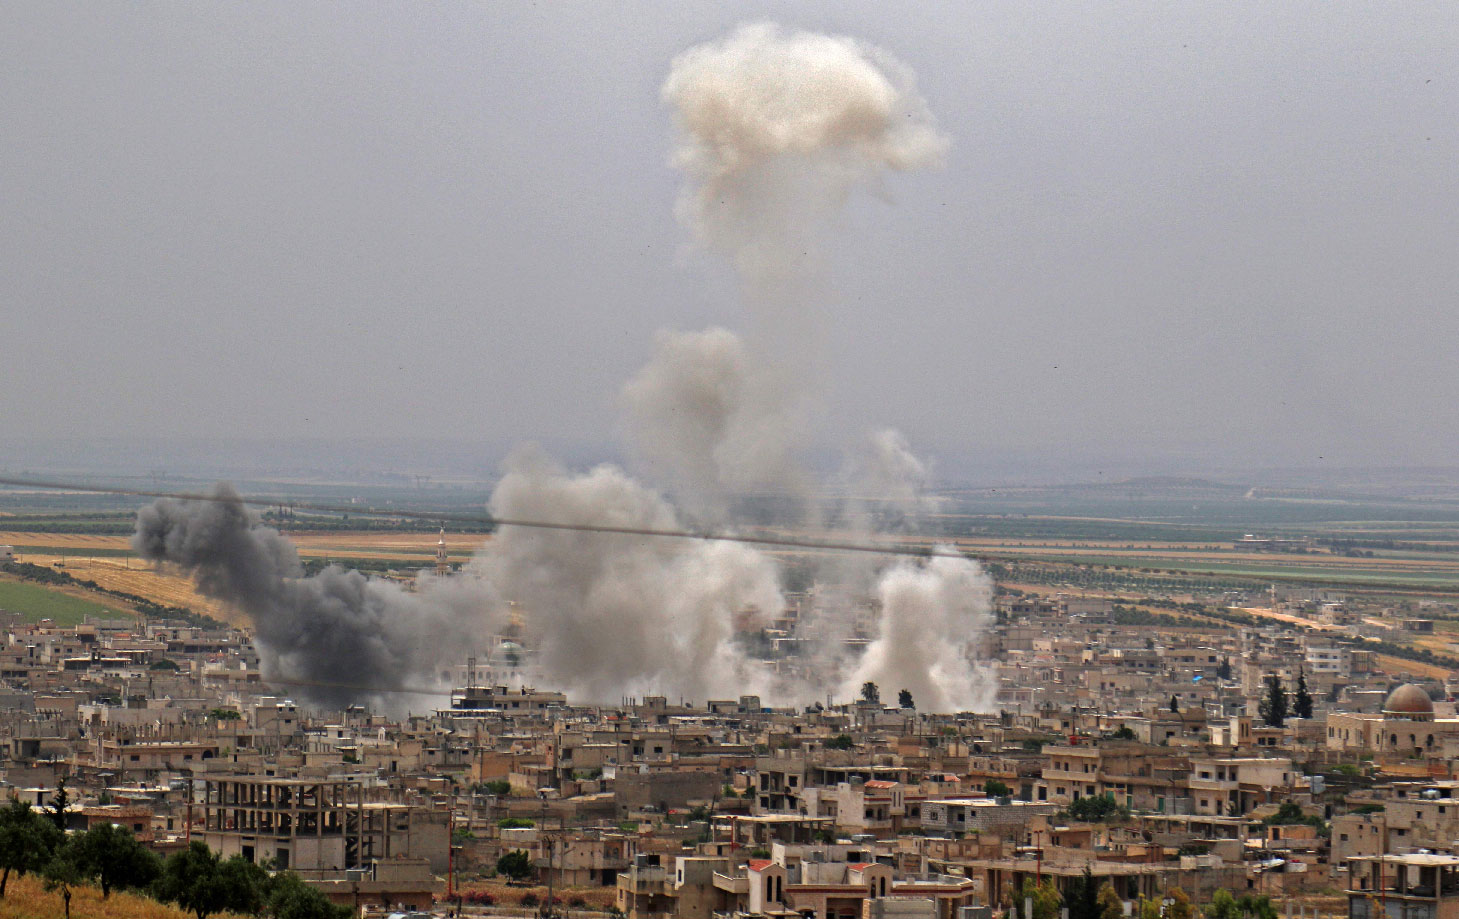 Smoke plumes rising following reported Syrian government forces' bombardment on the town of Khan Sheikhun